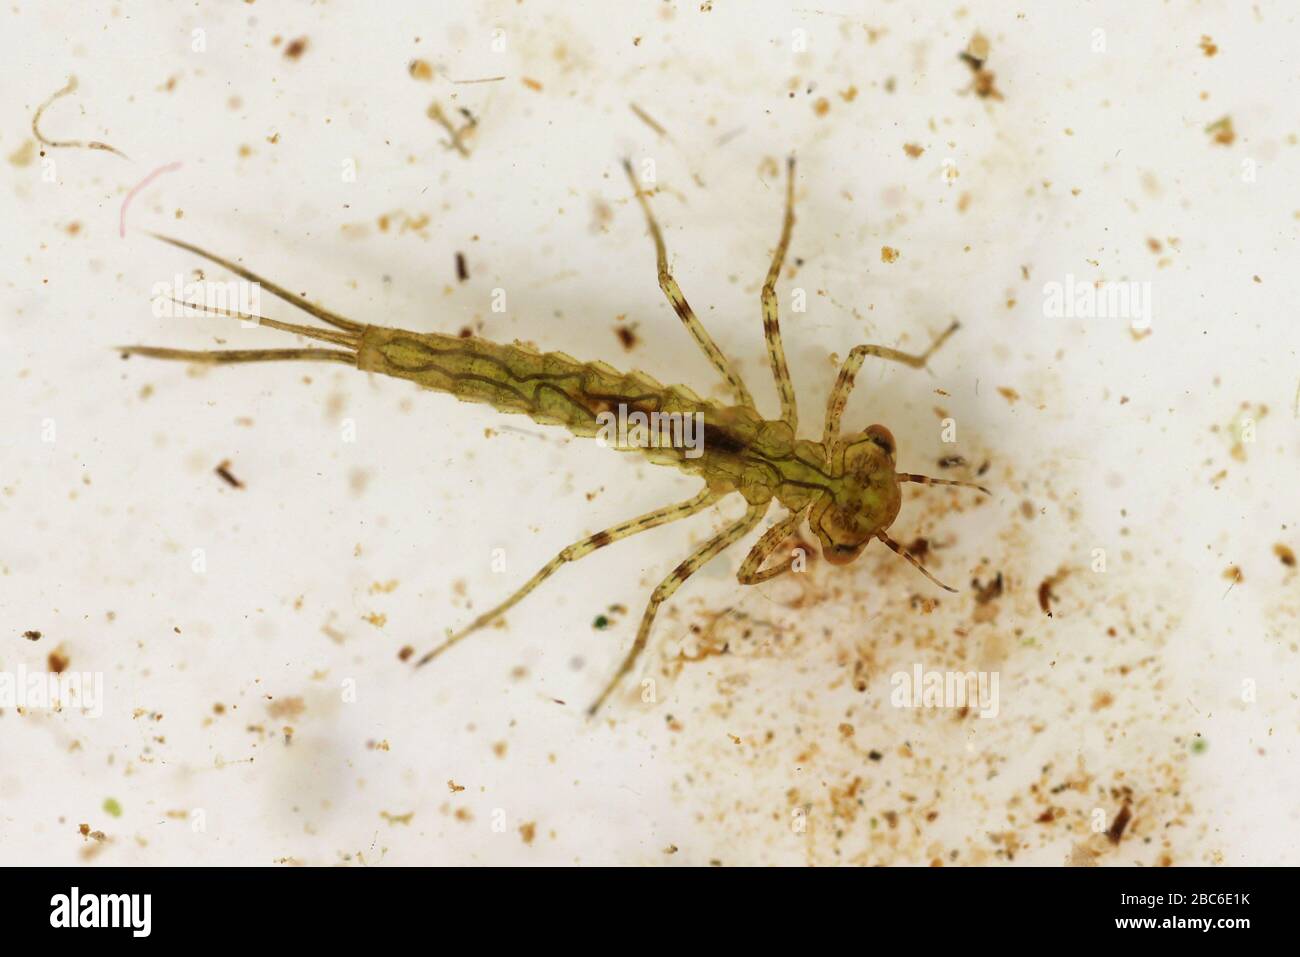 Mayfly Nymph - Pond dipping Species UK Foto Stock